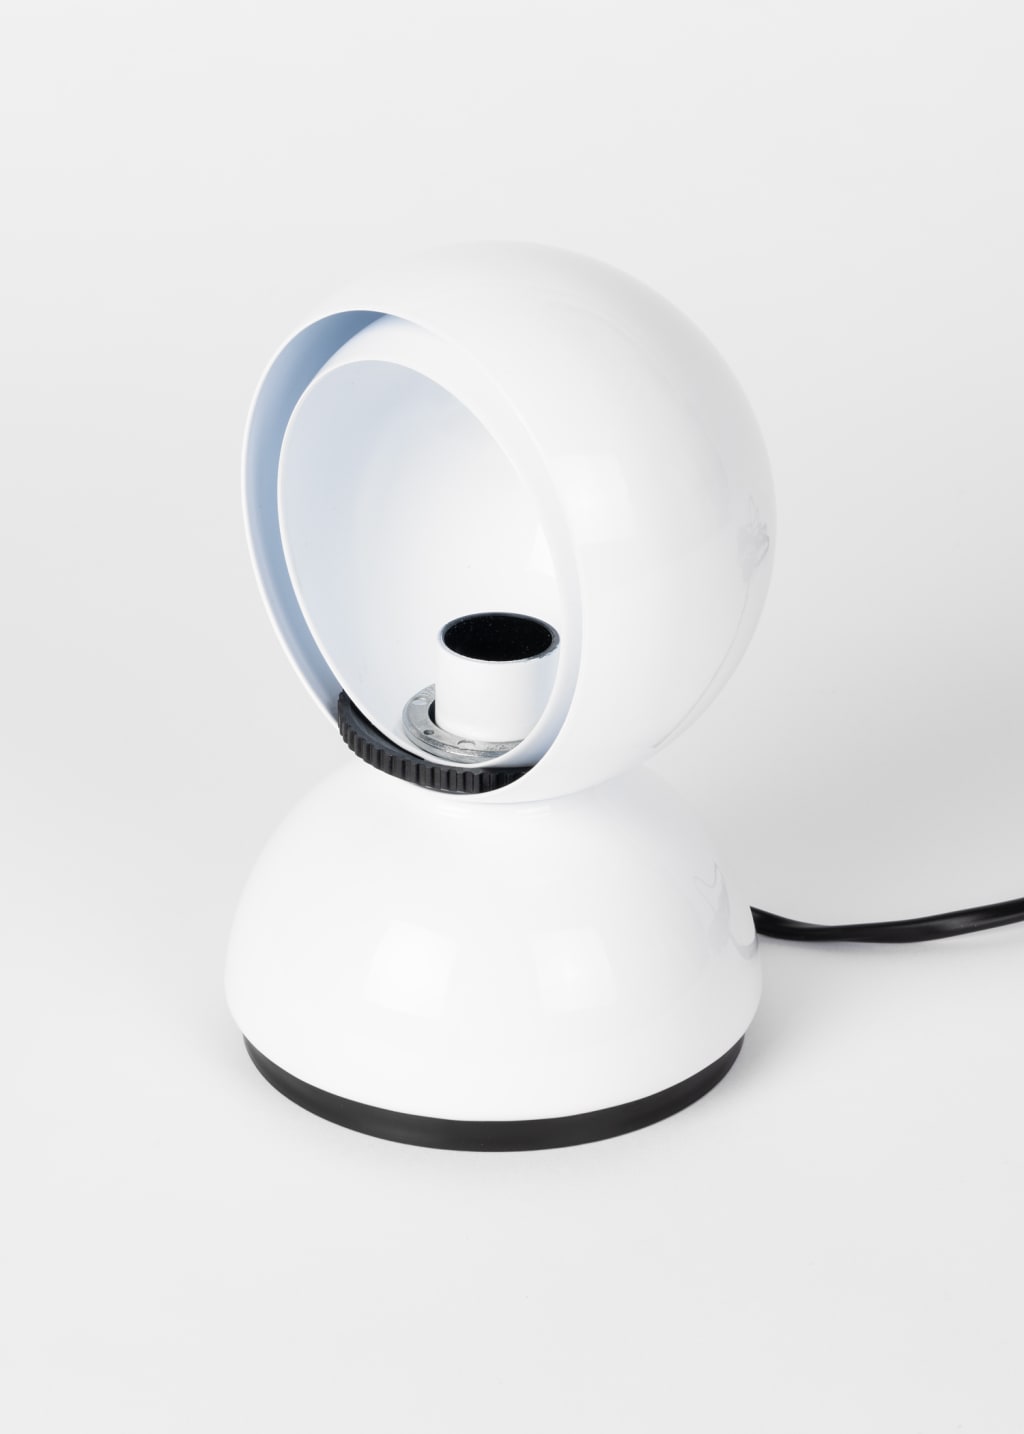 Product View - White 'Eclisse' Table Lamp by Artemide - UK Plug